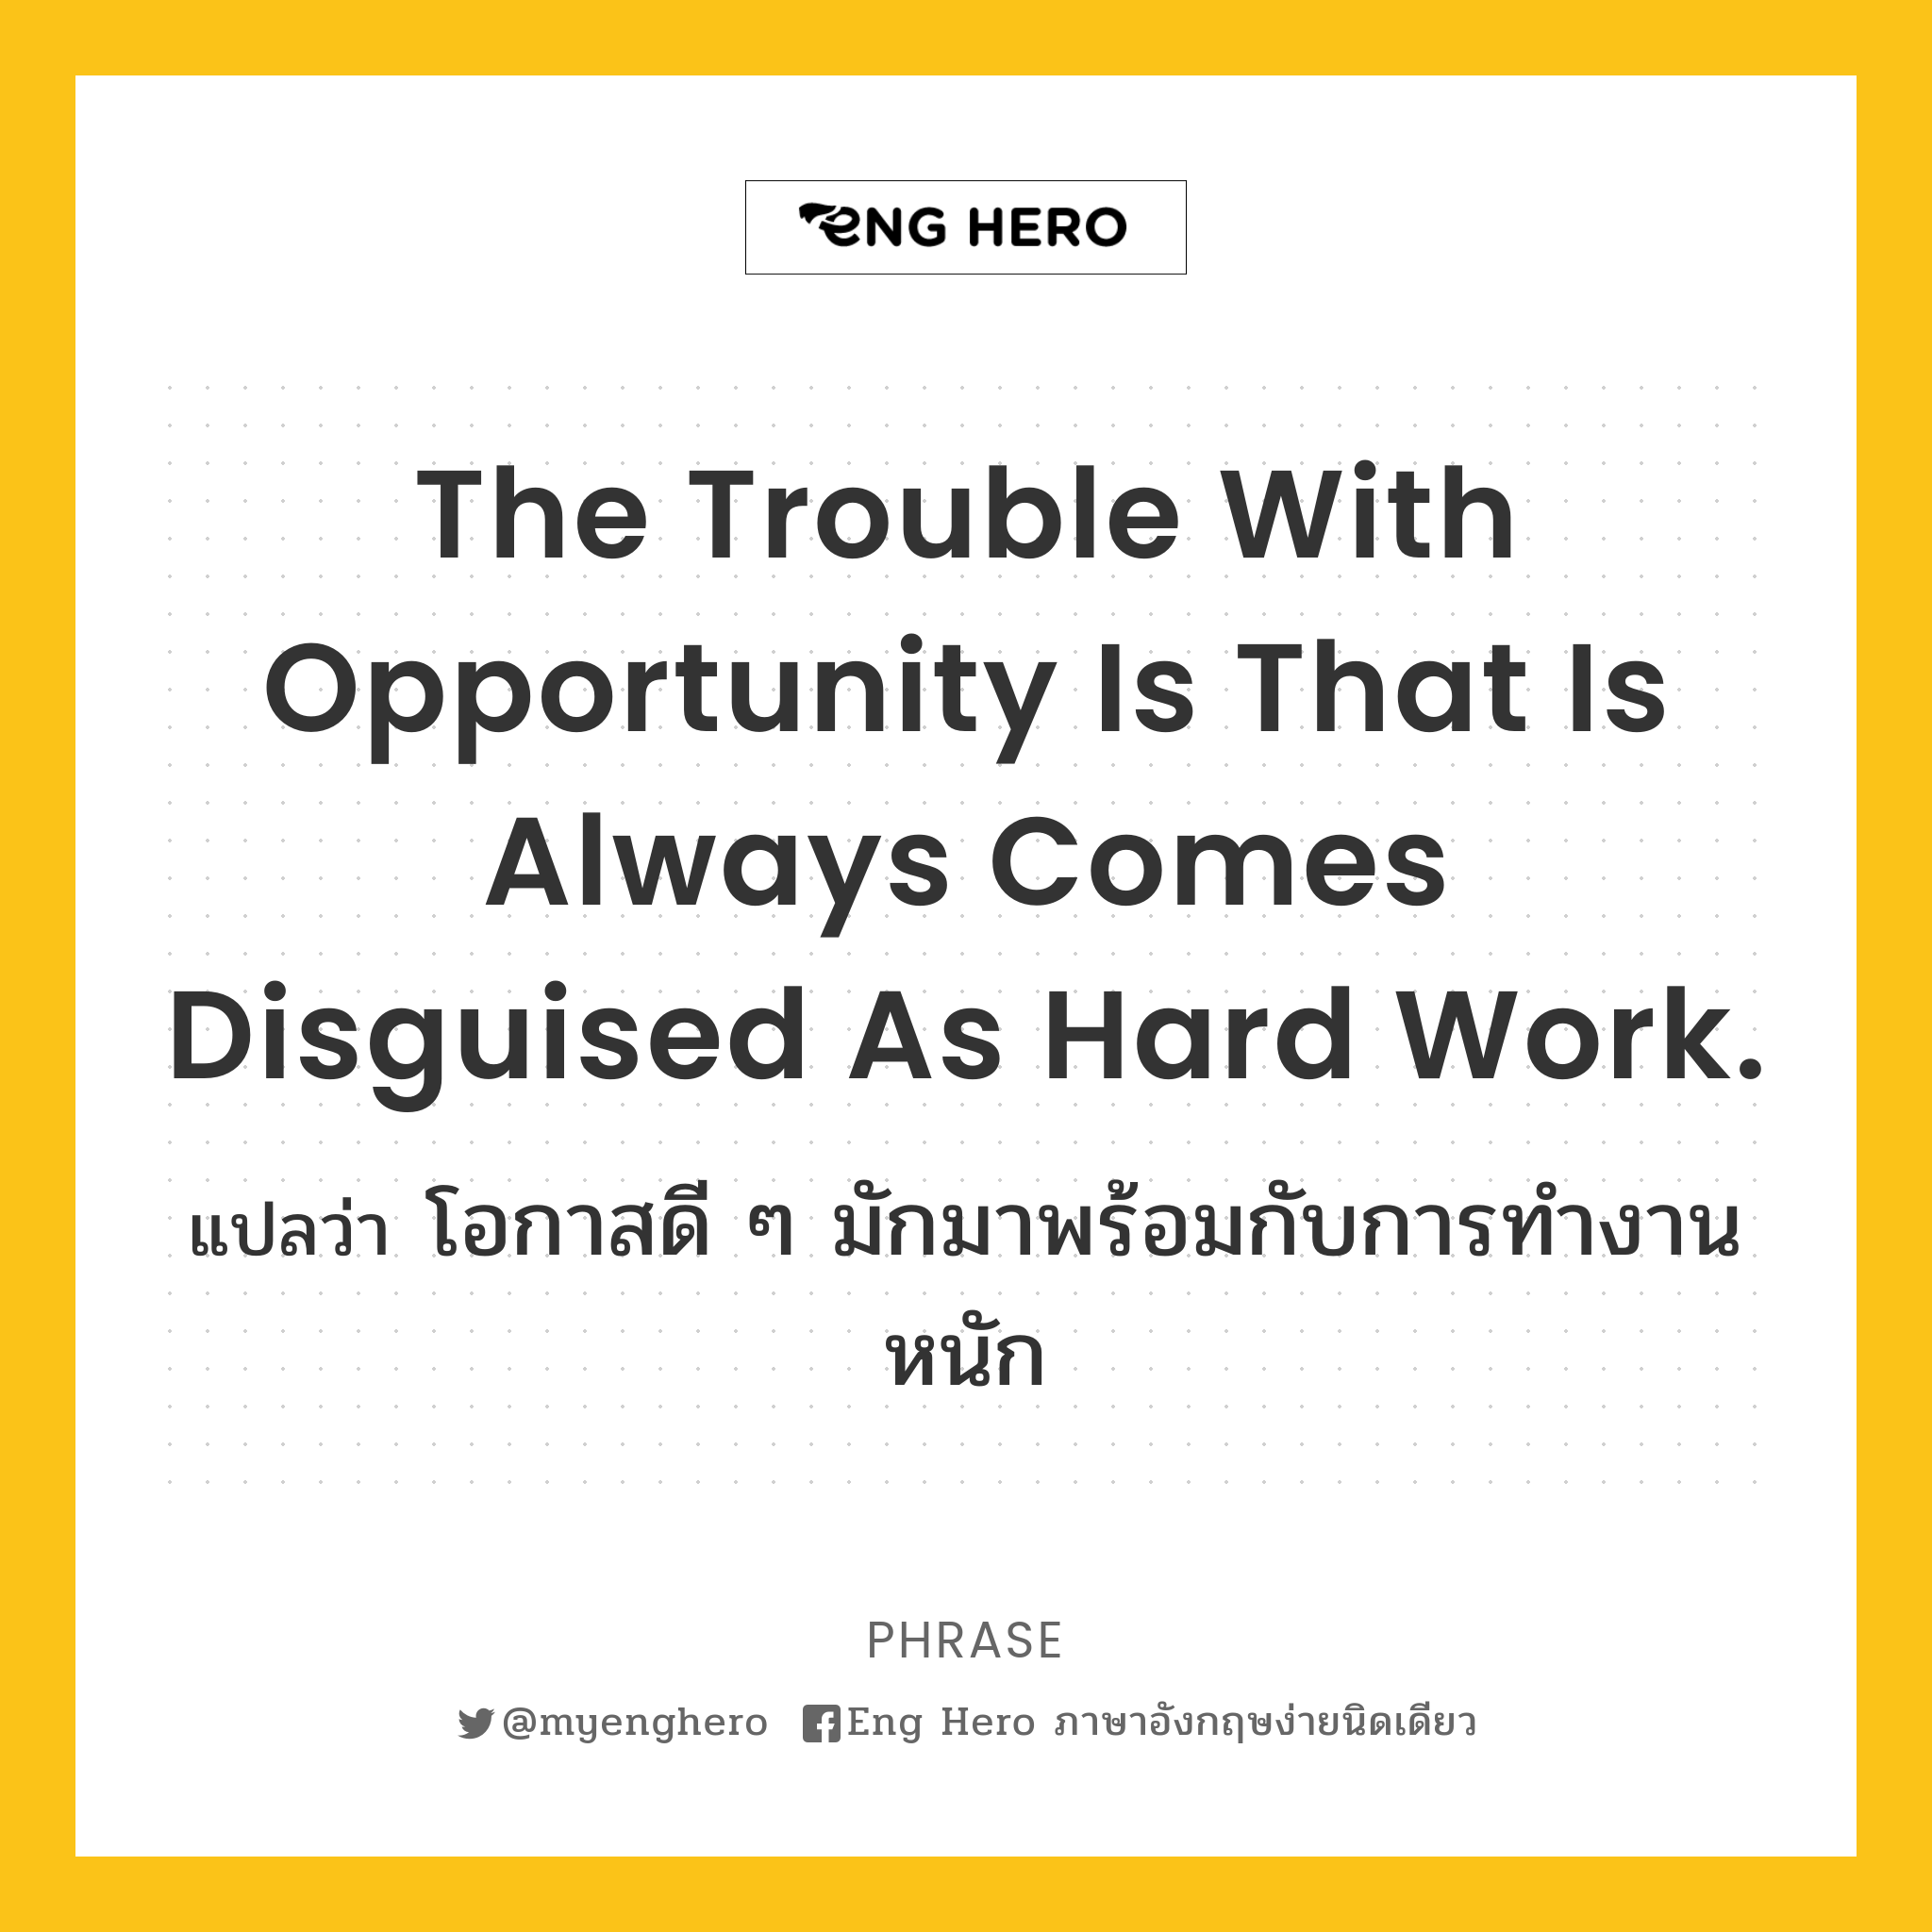 The trouble with opportunity is that is always comes disguised as hard work.